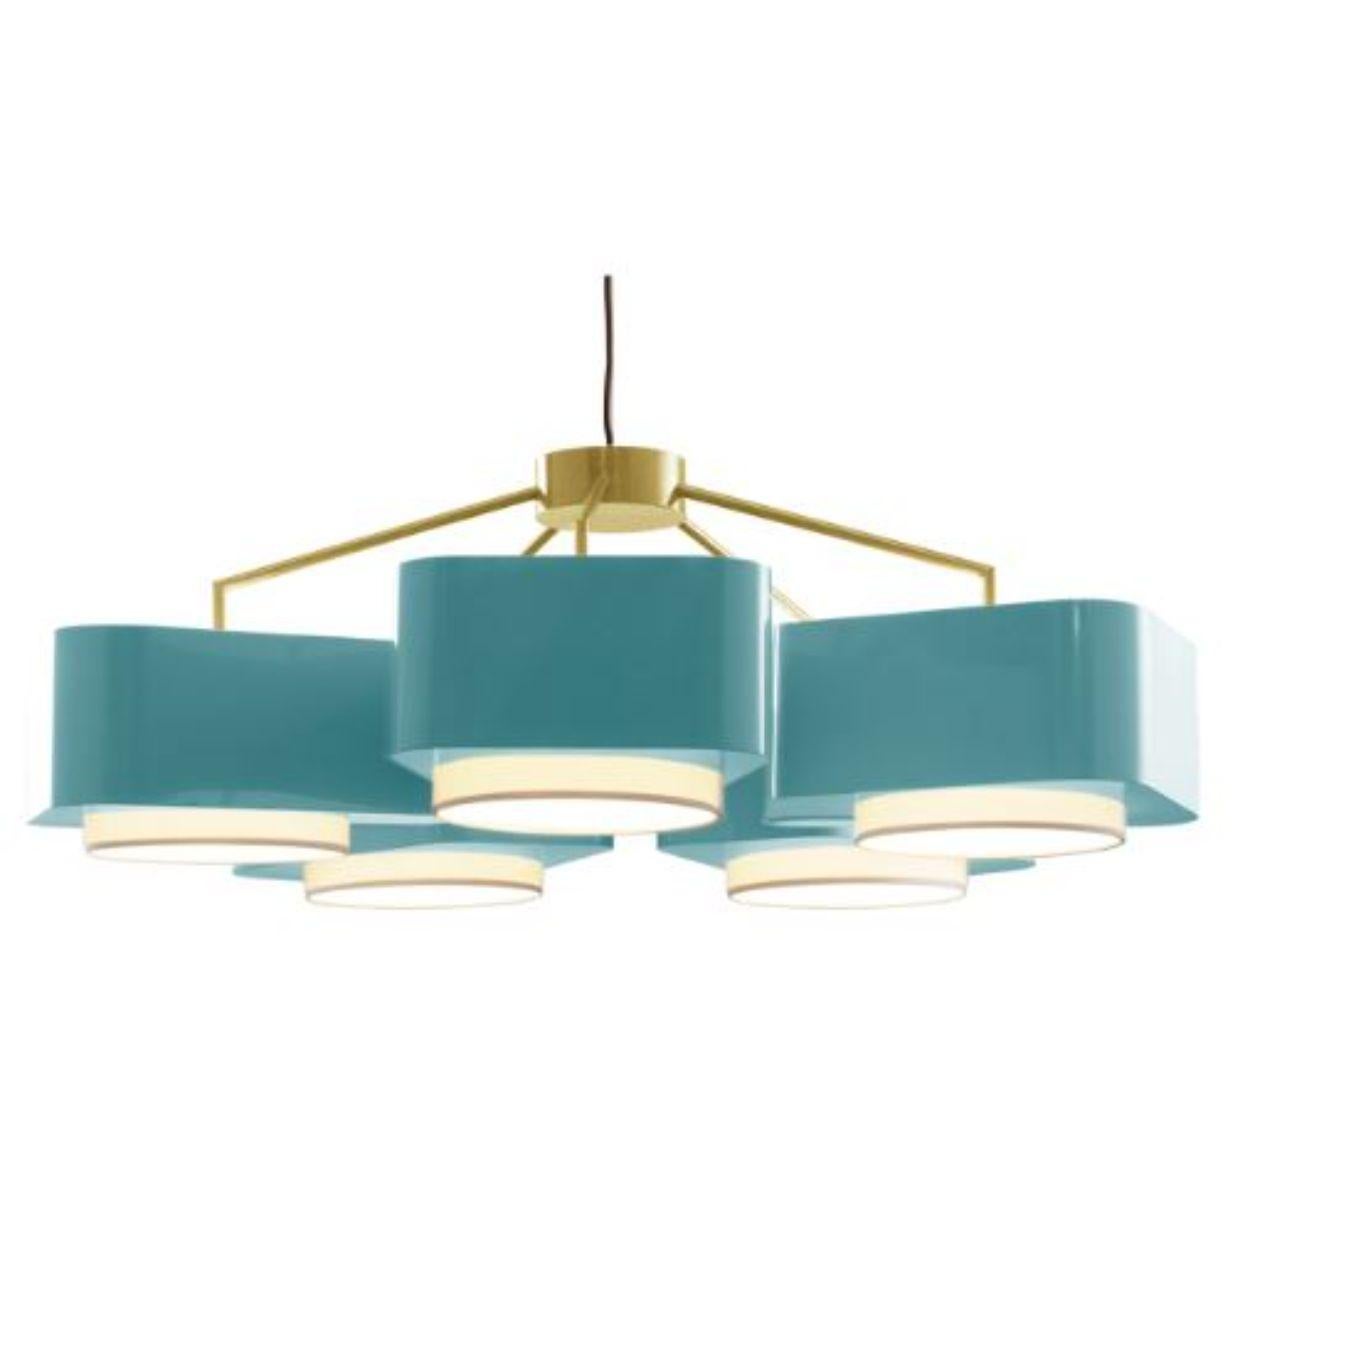 Jade and Cobalt Carousel Suspension Lamp by Dooq For Sale 2